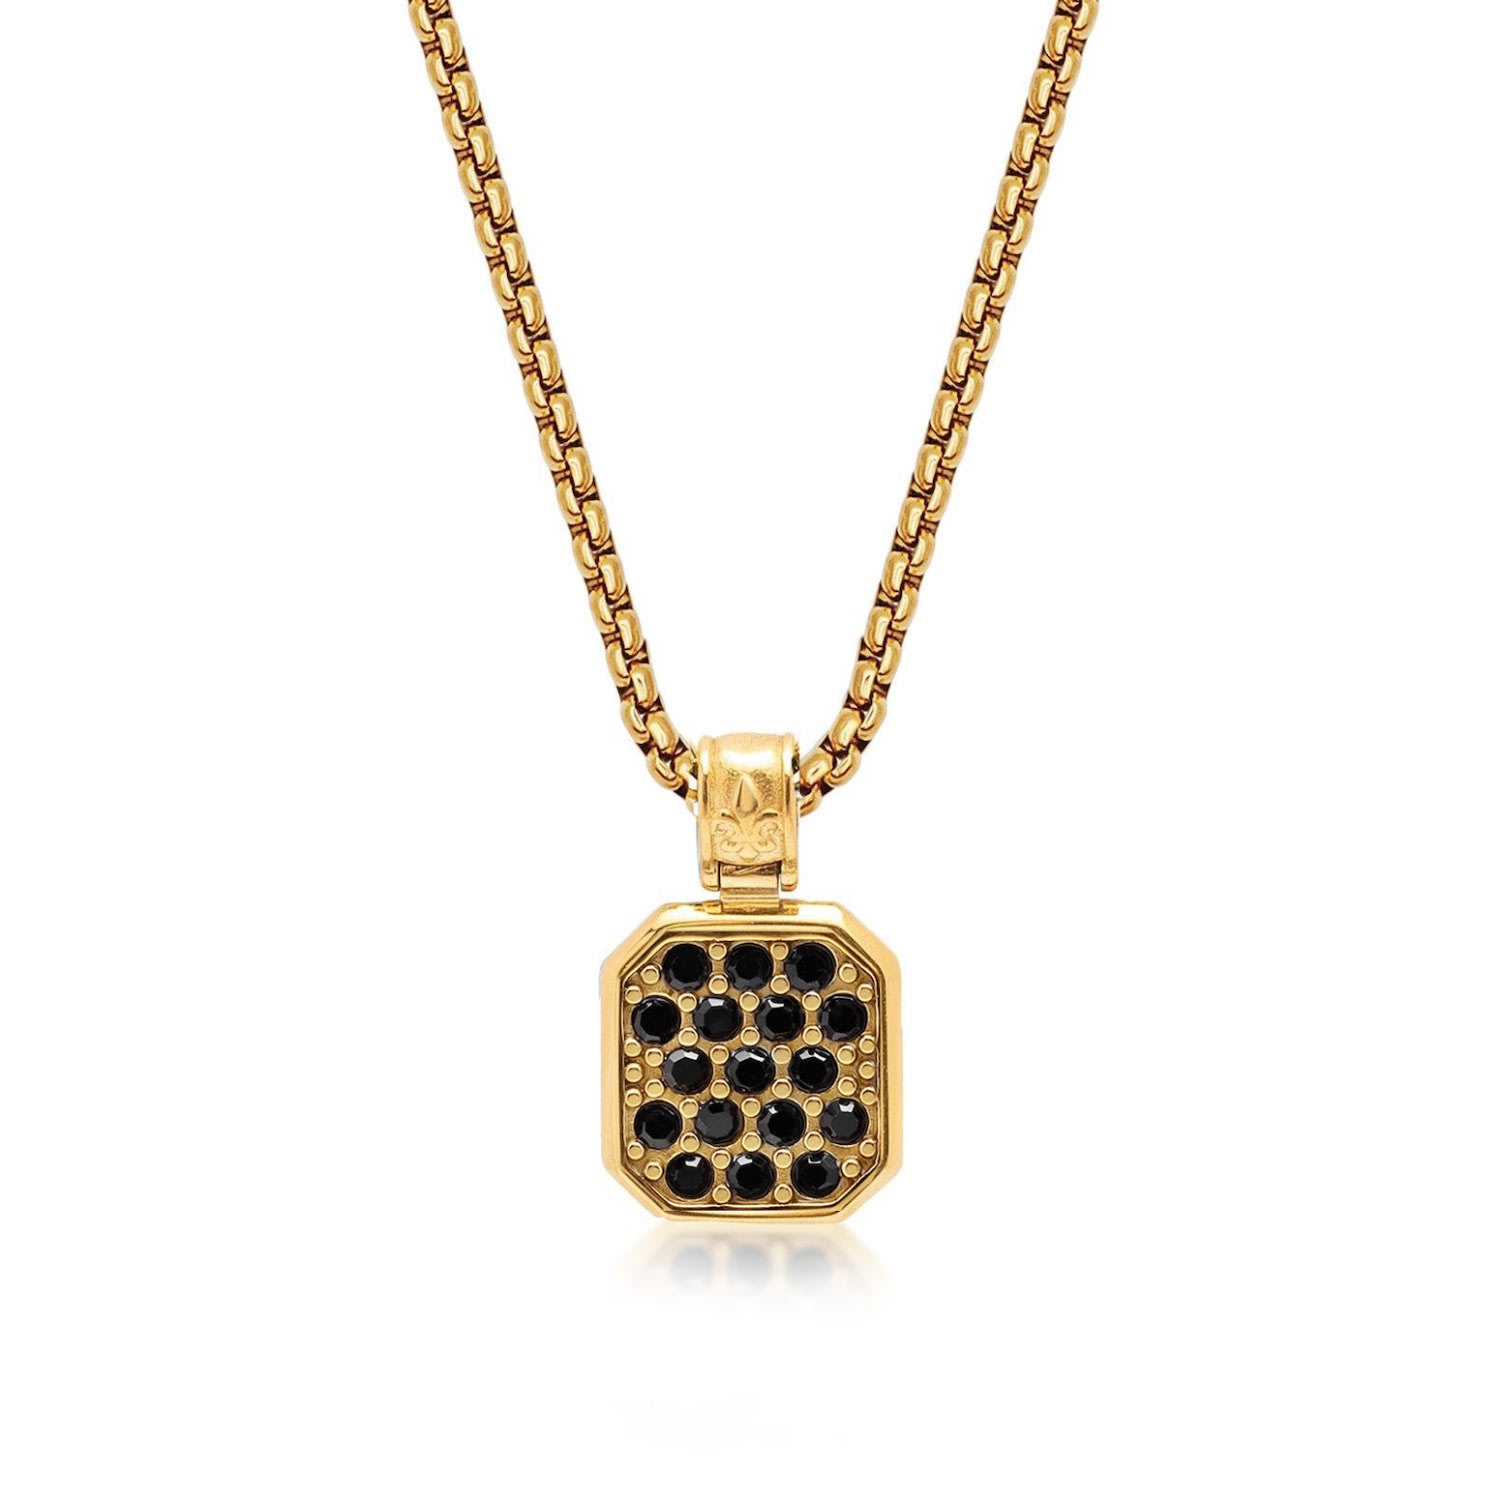 Men's Gold / Black Gold Necklace With Black Cz Square Pendant Nialaya